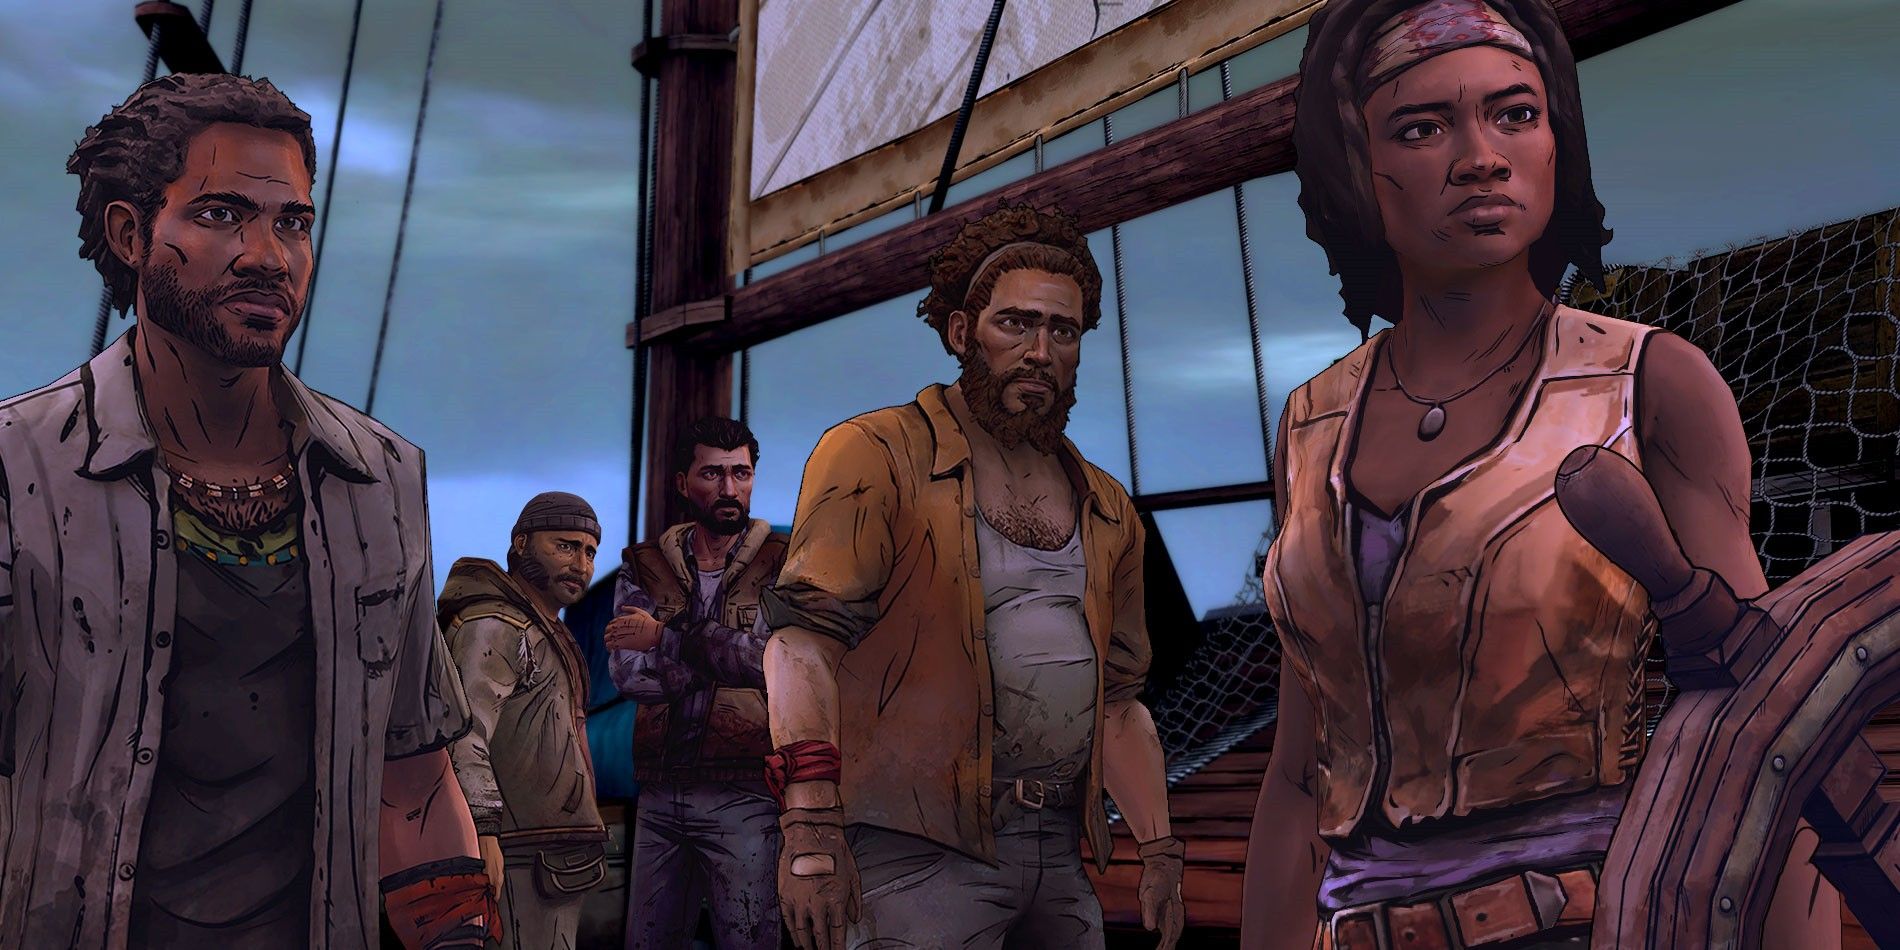 Siddiq, Pete and Michonne in The Walking Dead Telltale game